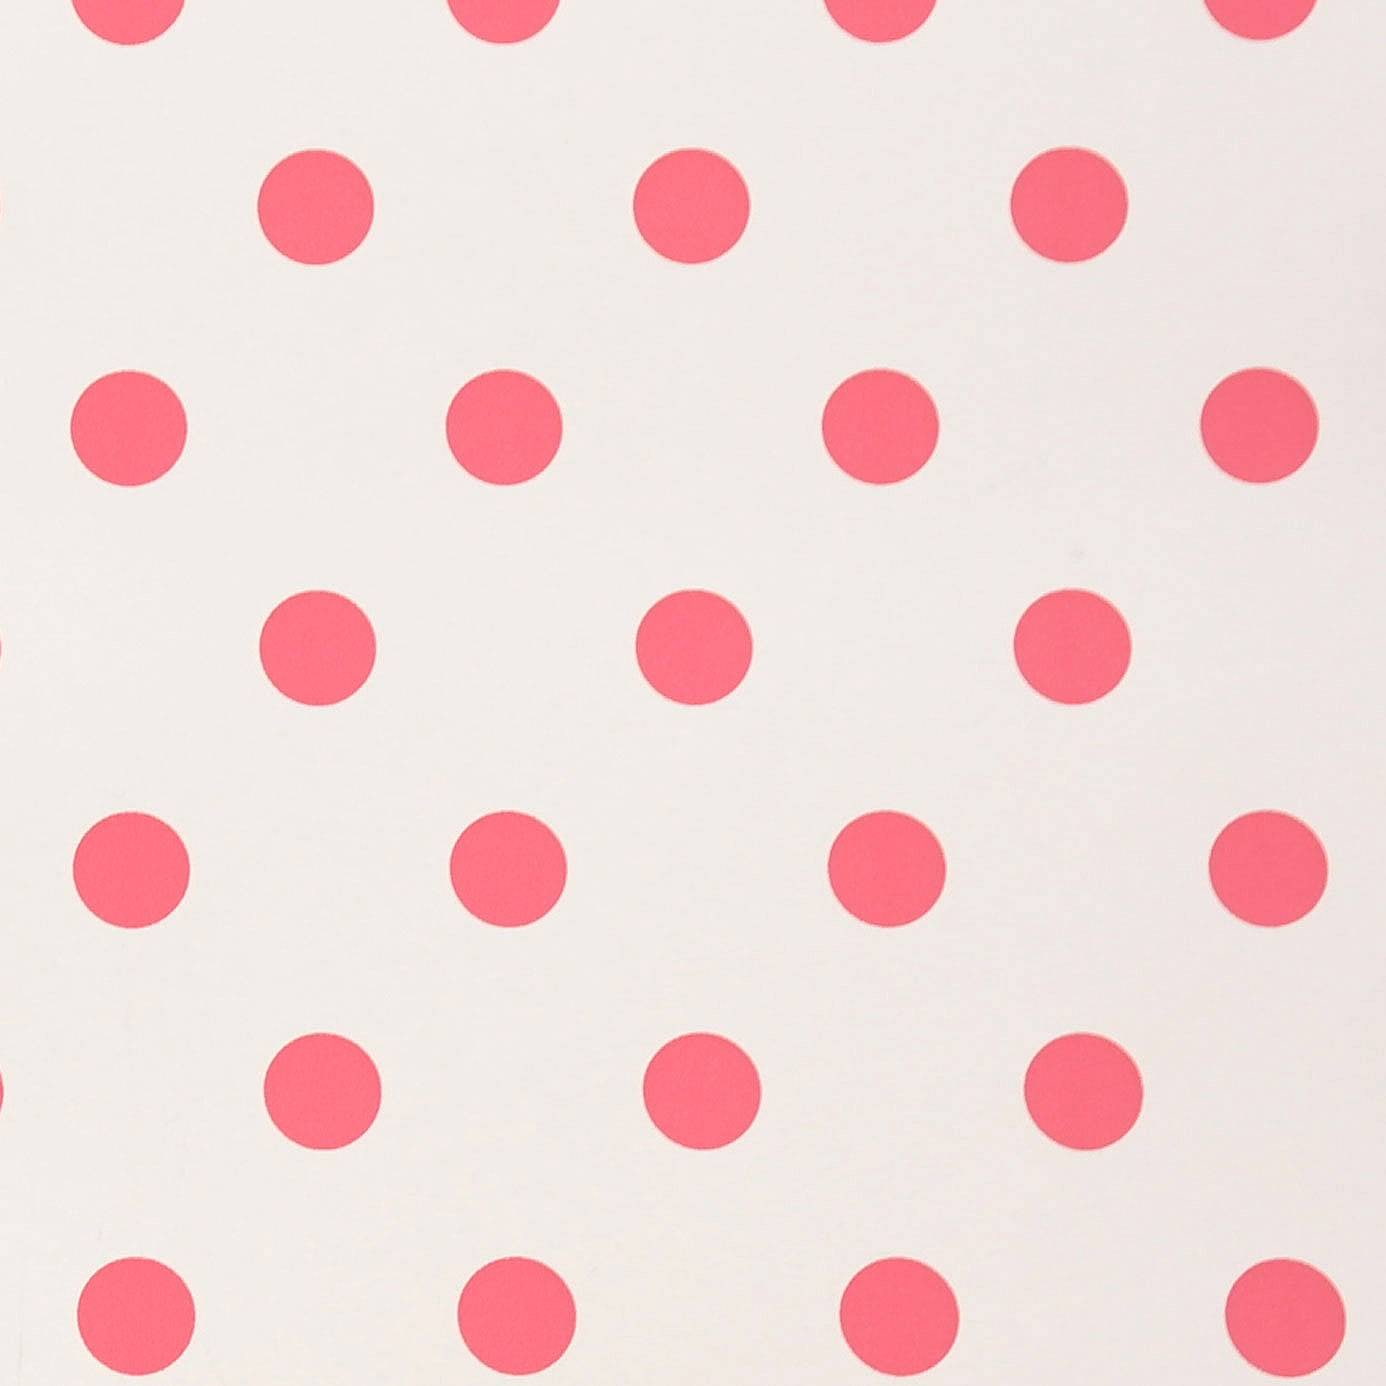 Art, Abstract, Polka Dot, Red Balls, Simple Background, pink-and-white polka dot illustration